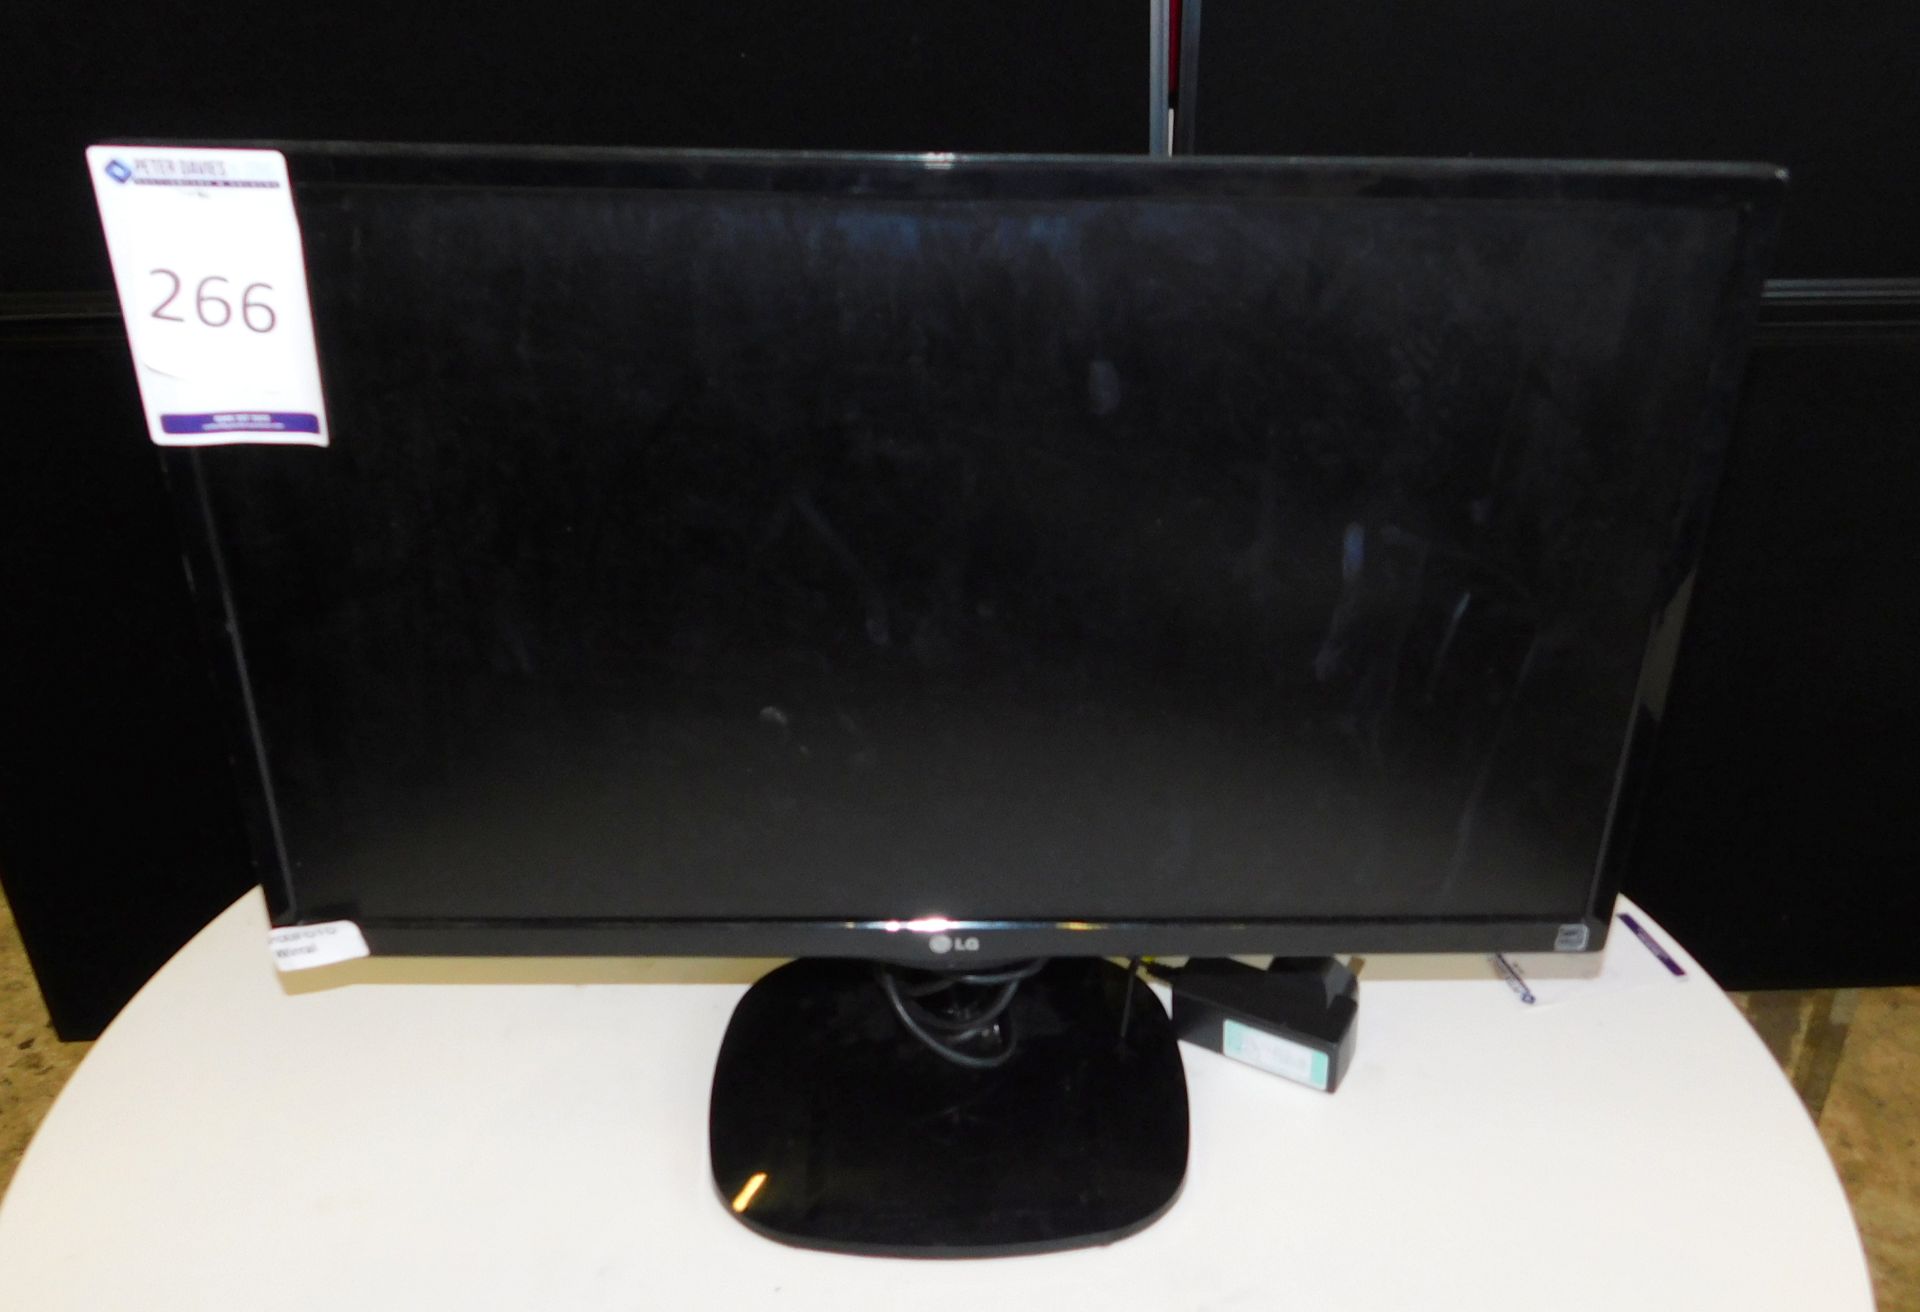 LG IPS LED 24” Monitor (Located The Auction Complex, Houldsworth Mill, Stockport, SK5 6DA)